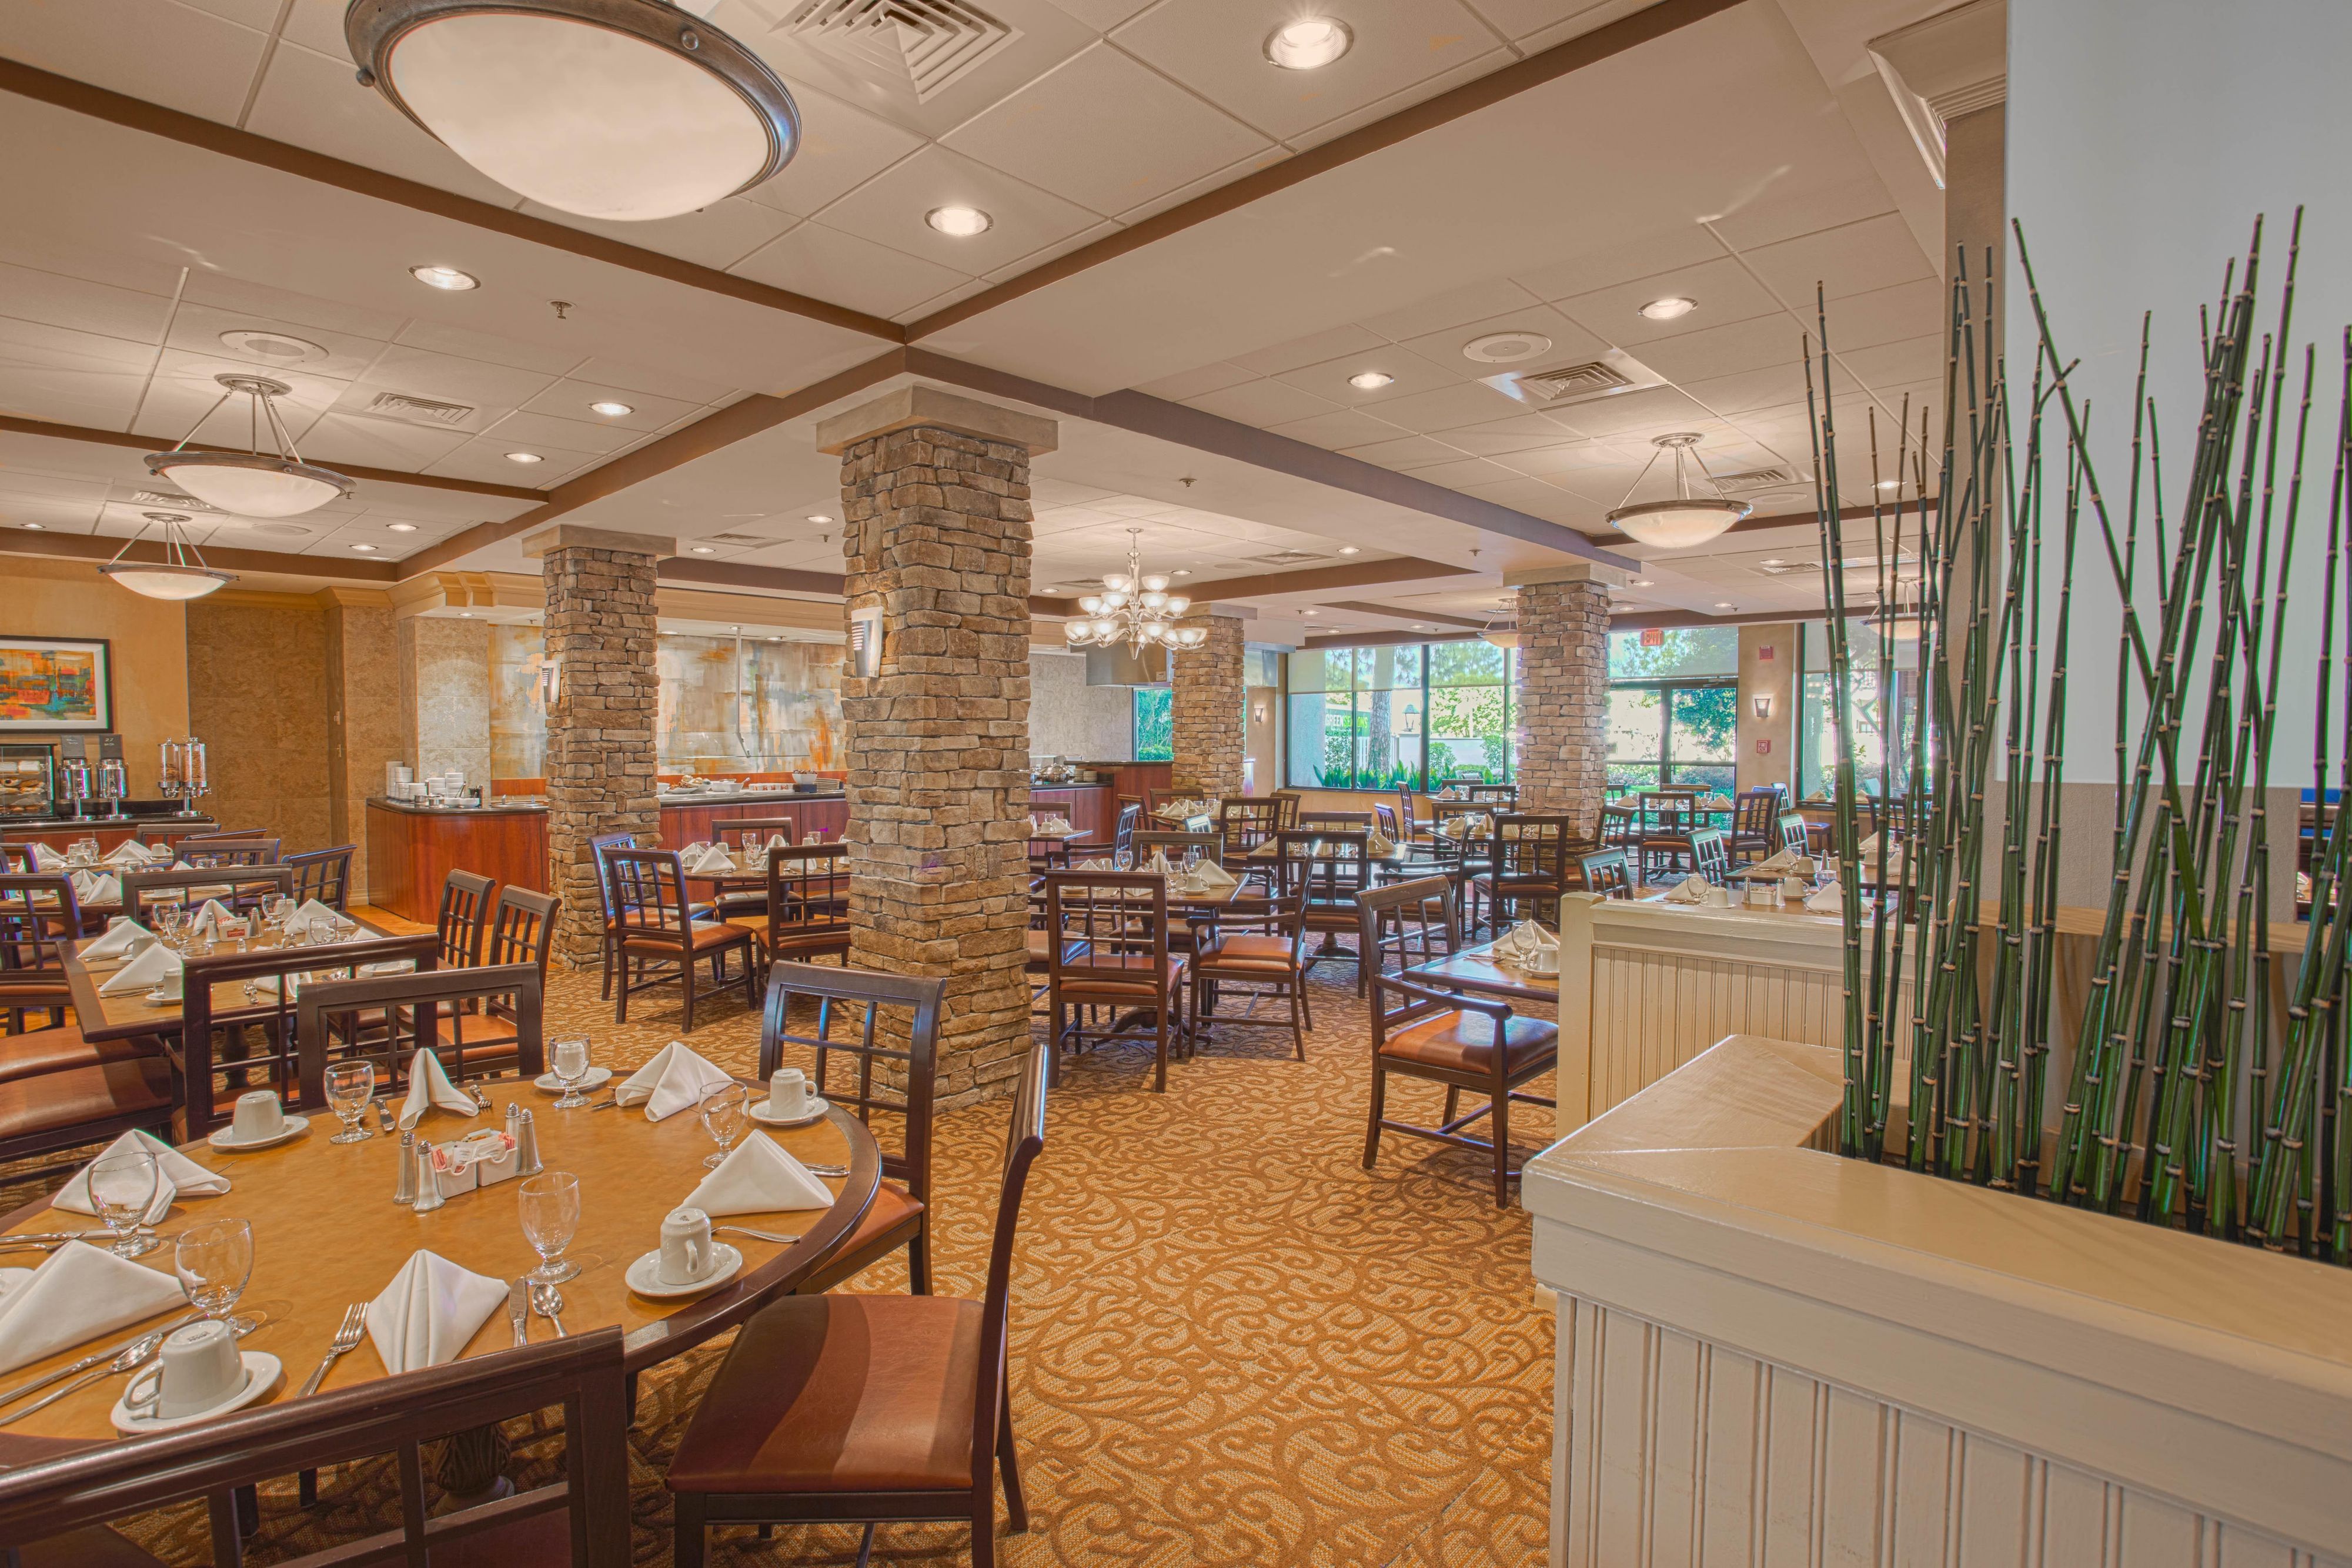 Enjoy a lovely evening at the Patio Grille Restaurant